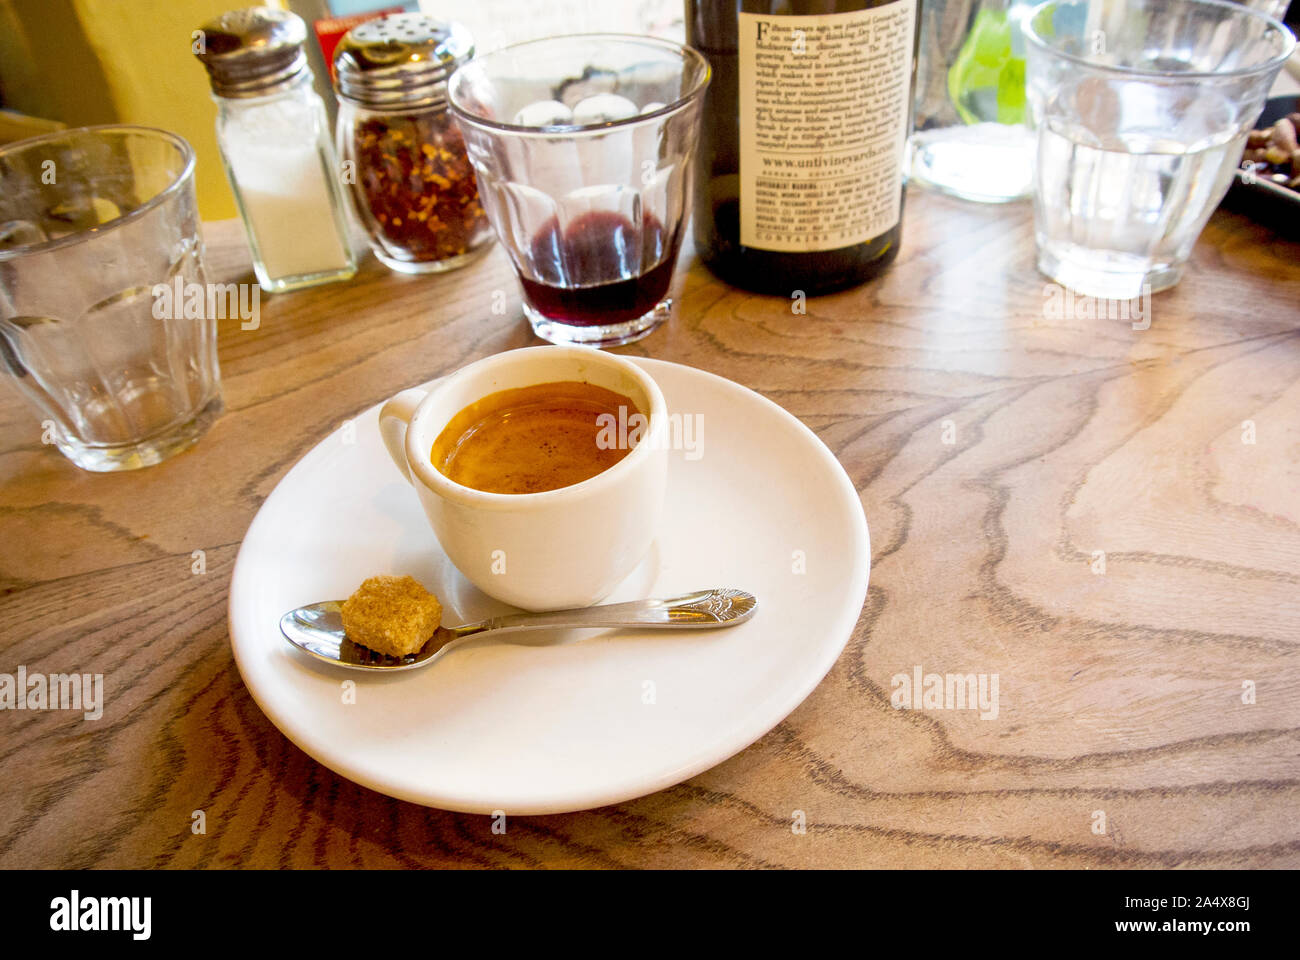 A shot of espresso sits on a table after a meal enjoyed with wine. Stock Photo